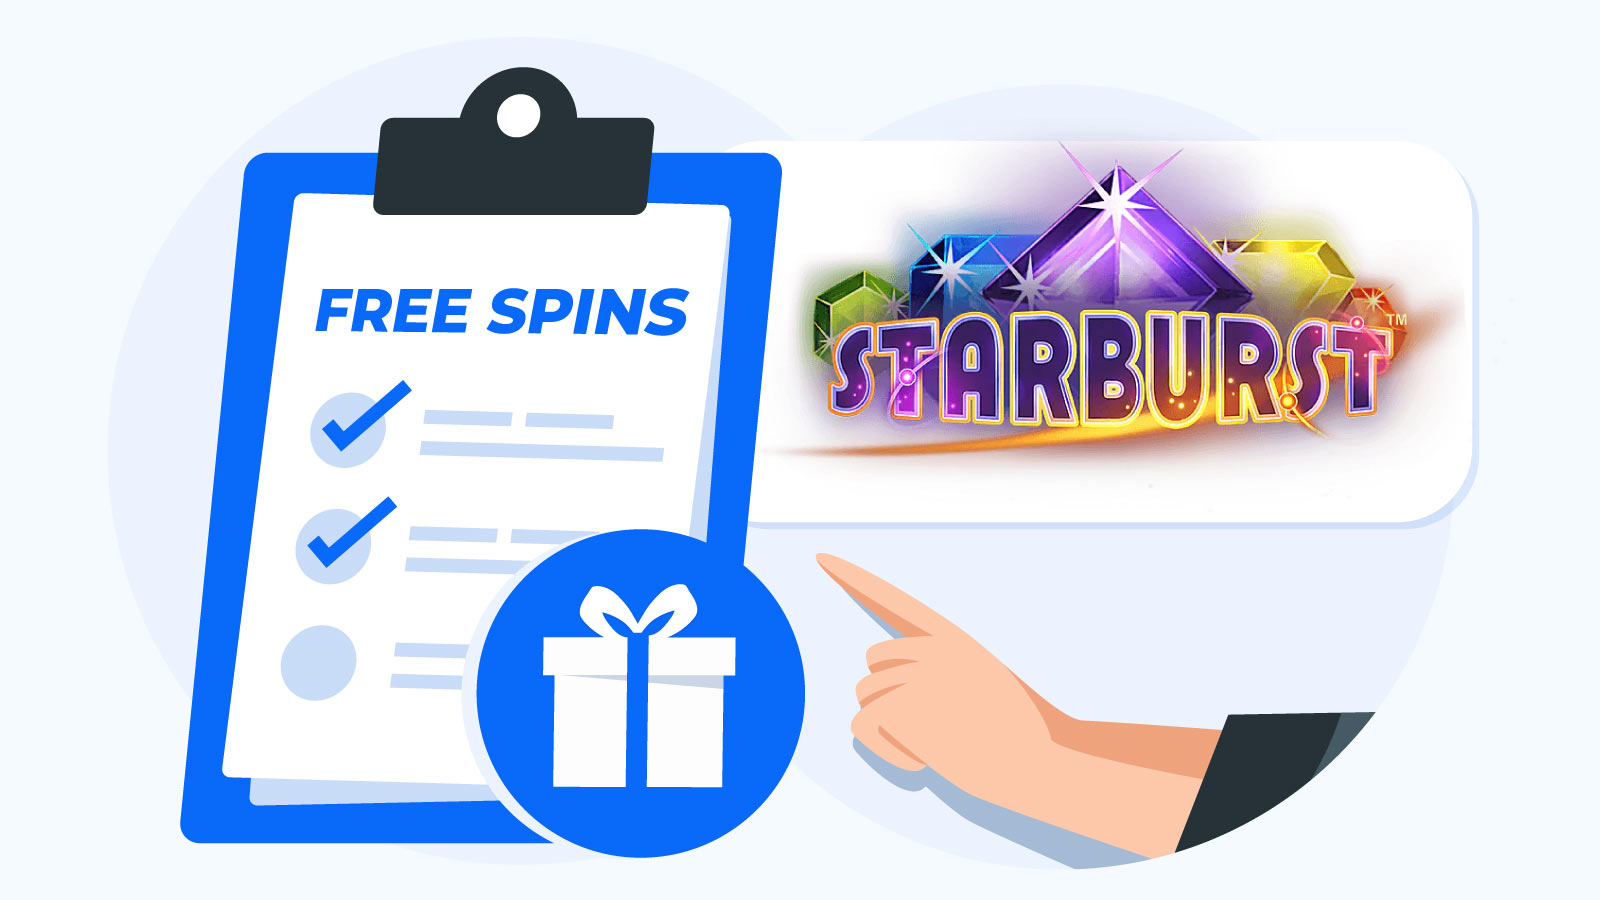 How to Claim Starburst Free Spins Offers